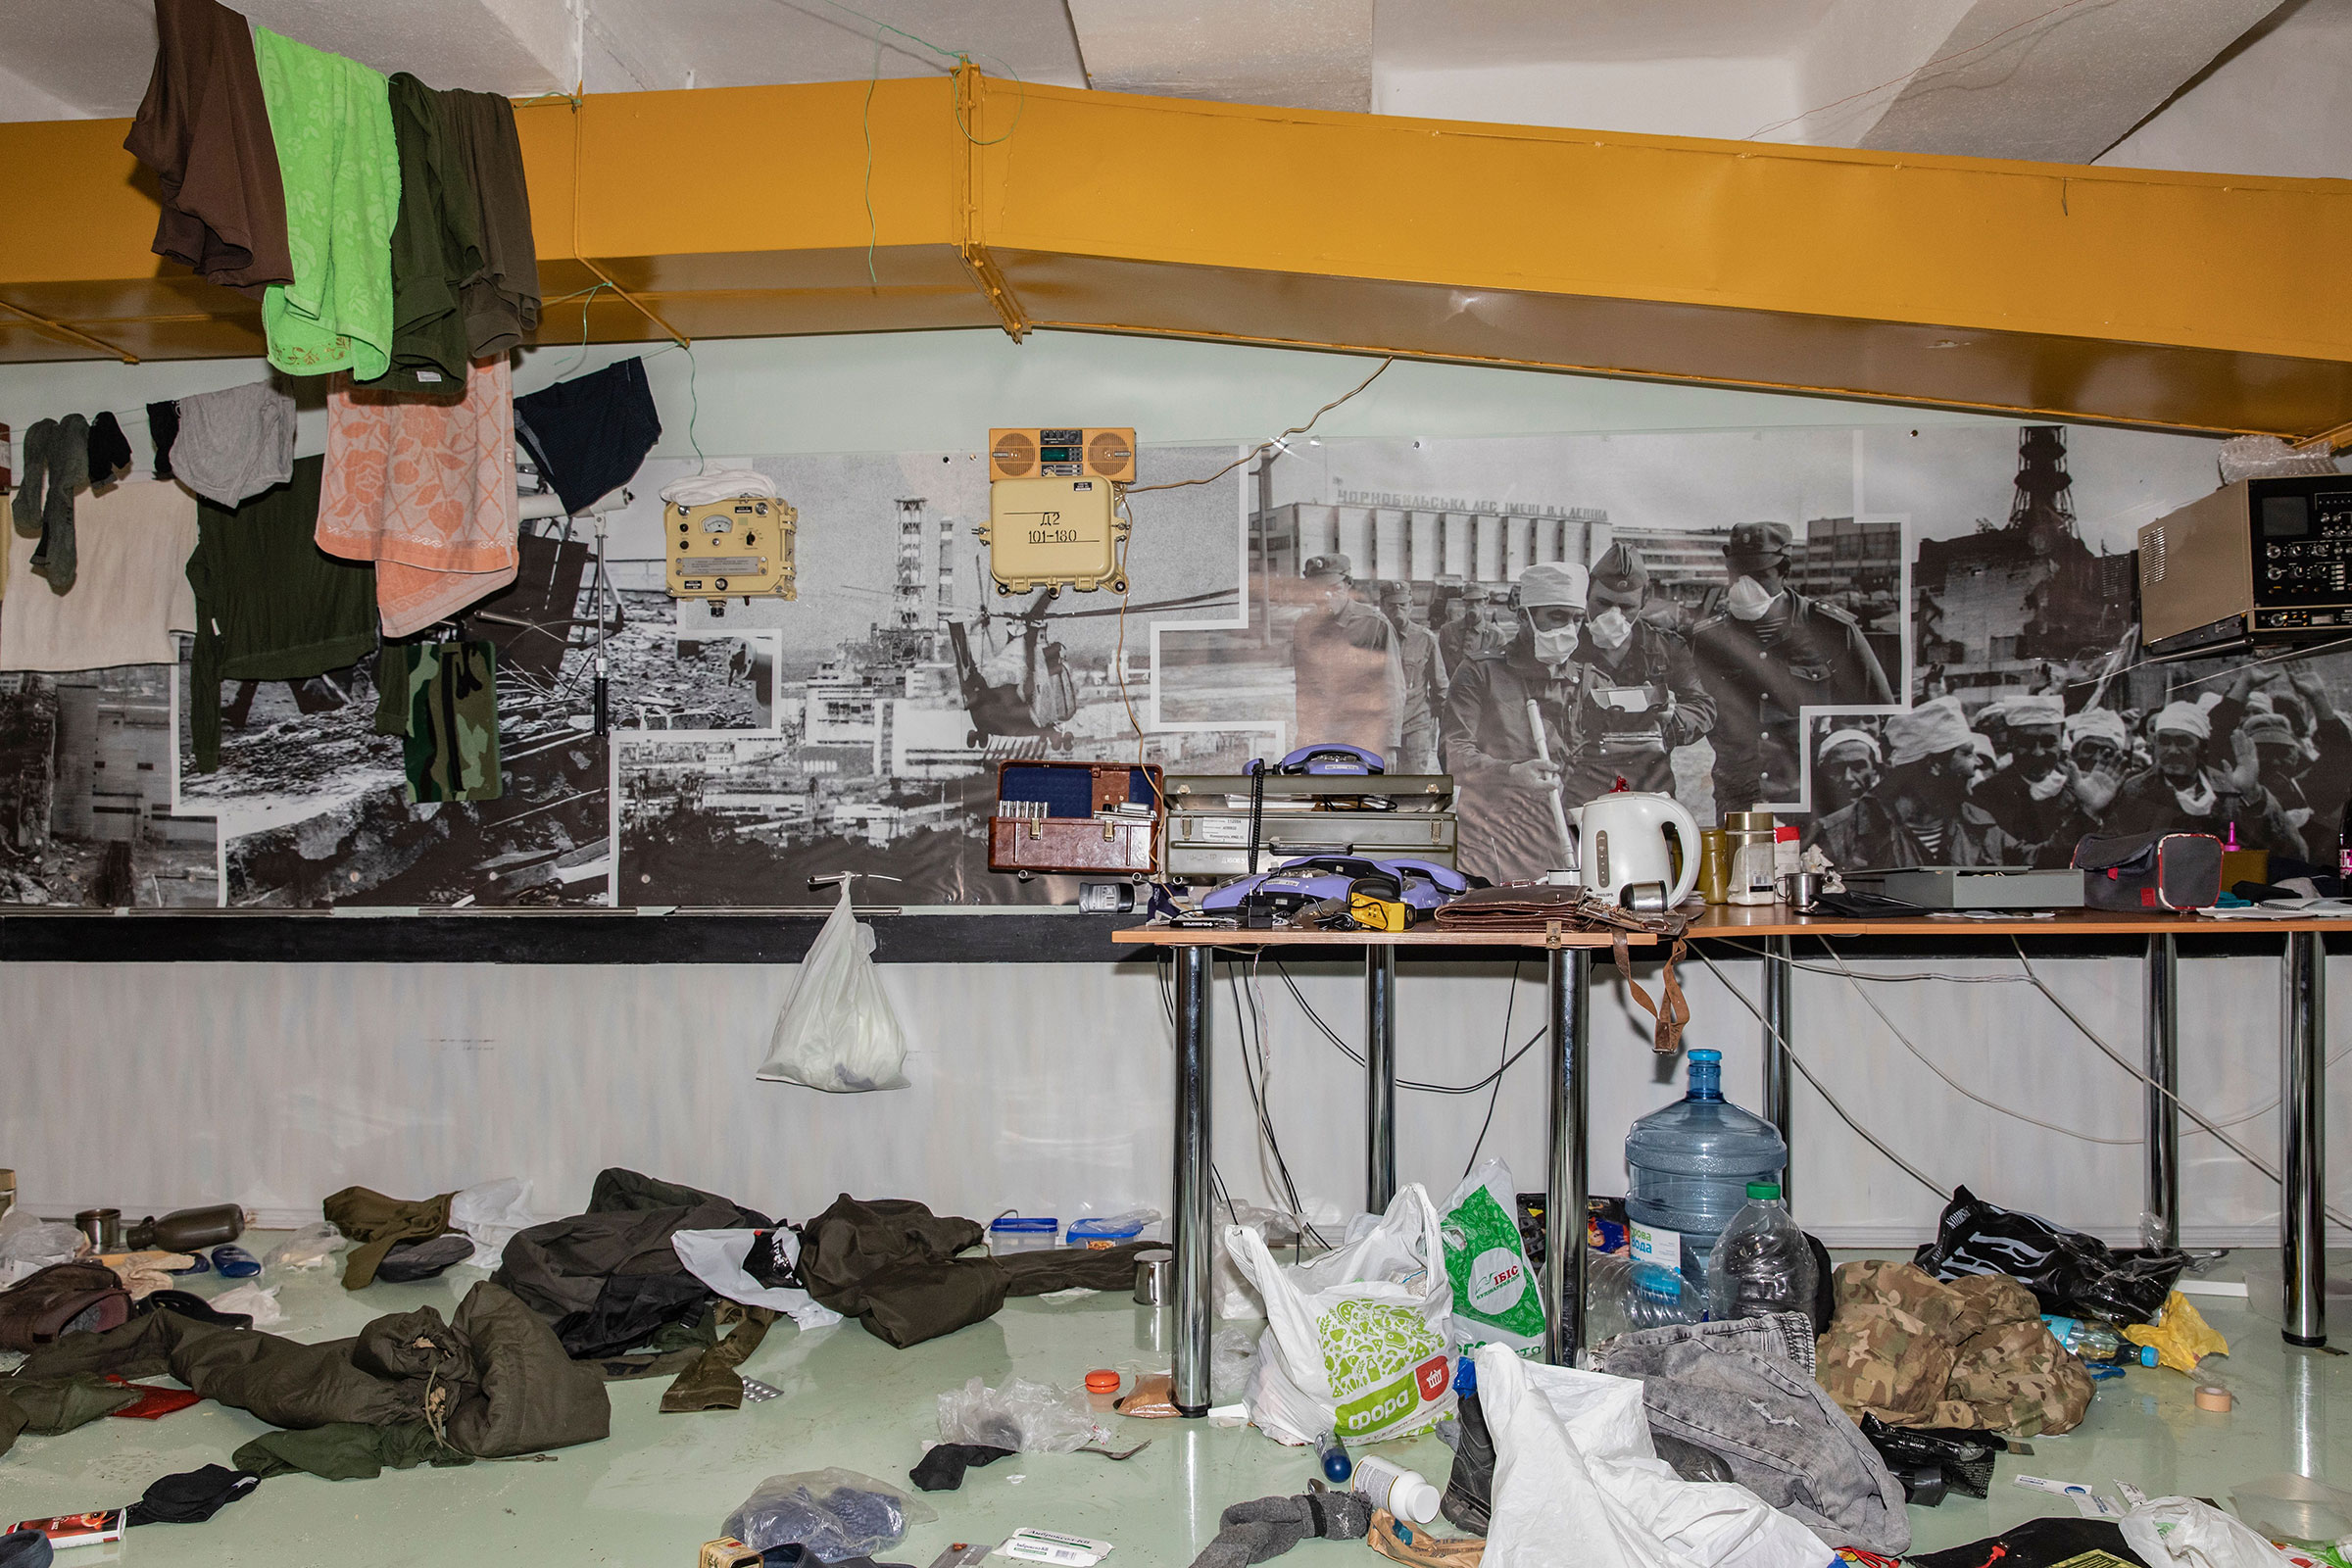 General view of a room in one of an administrative building of the Chernobyl nuclear power plant, where Ukrainian National Guard servicemen were held as hostages since start of Russian invasion near city of Chernobyl, on April 8.